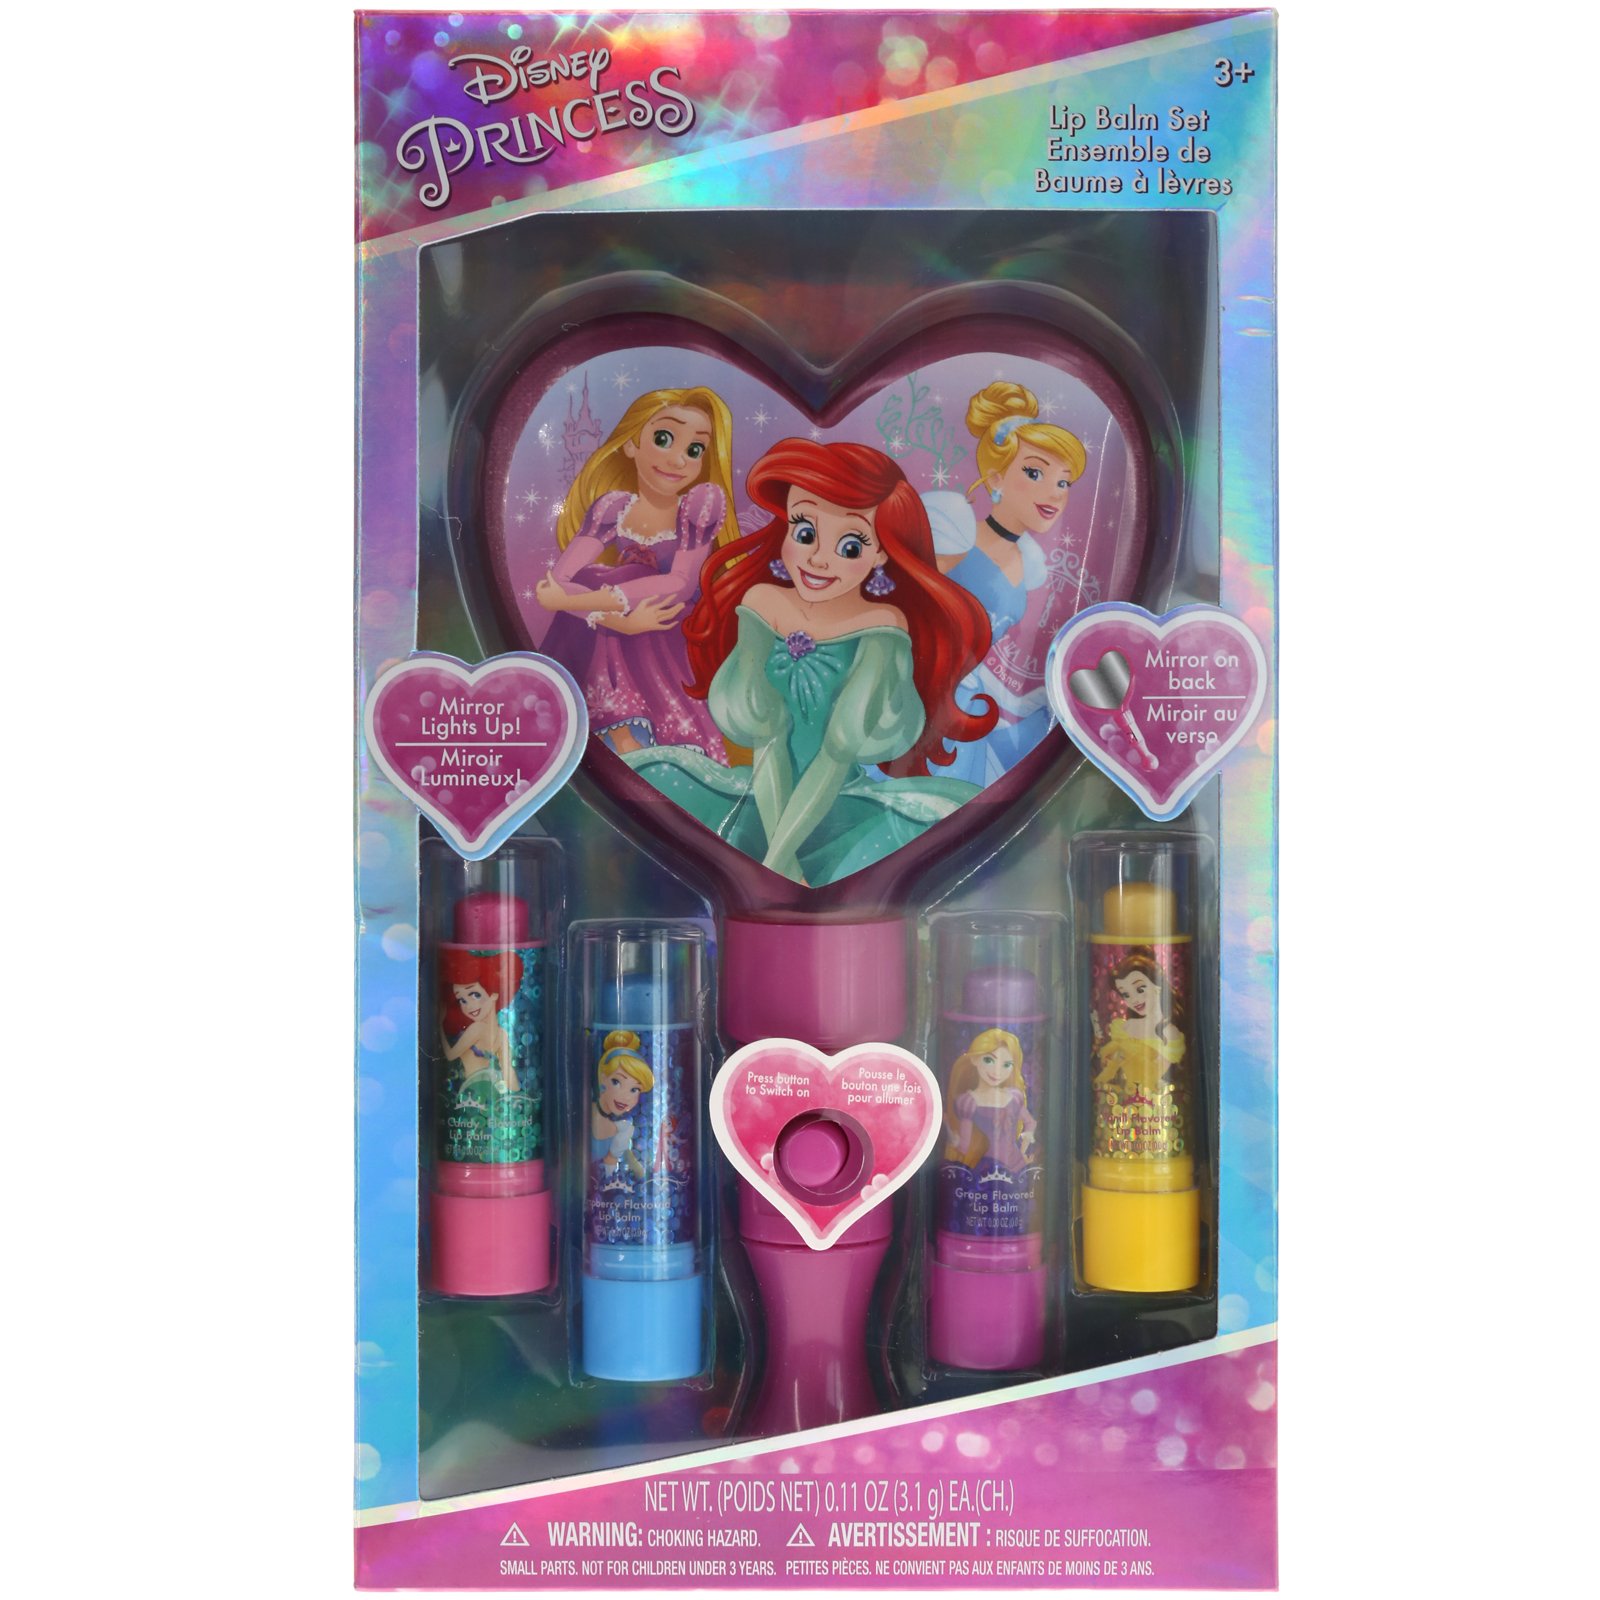 Townley Girl Disney Princess Sparkly Lip Balm For Girls, 4 pack with Light Up Mirror